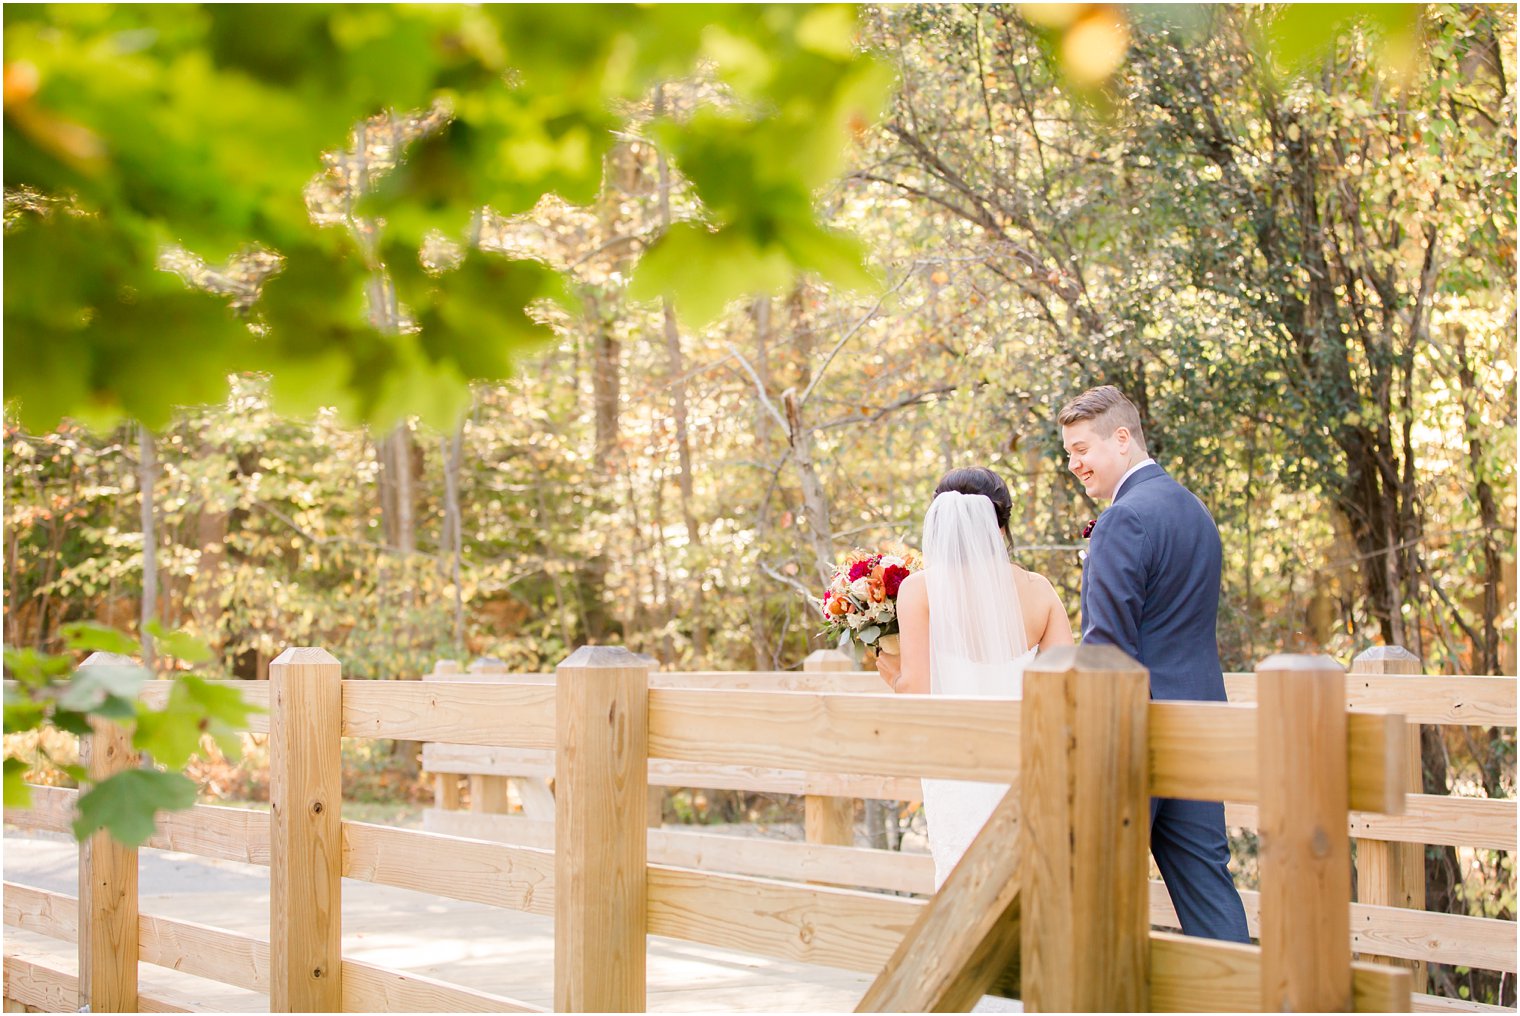 Candid photo of bride and groom at Hedden Park | Photos by NJ Wedding Photographers Idalia Photography